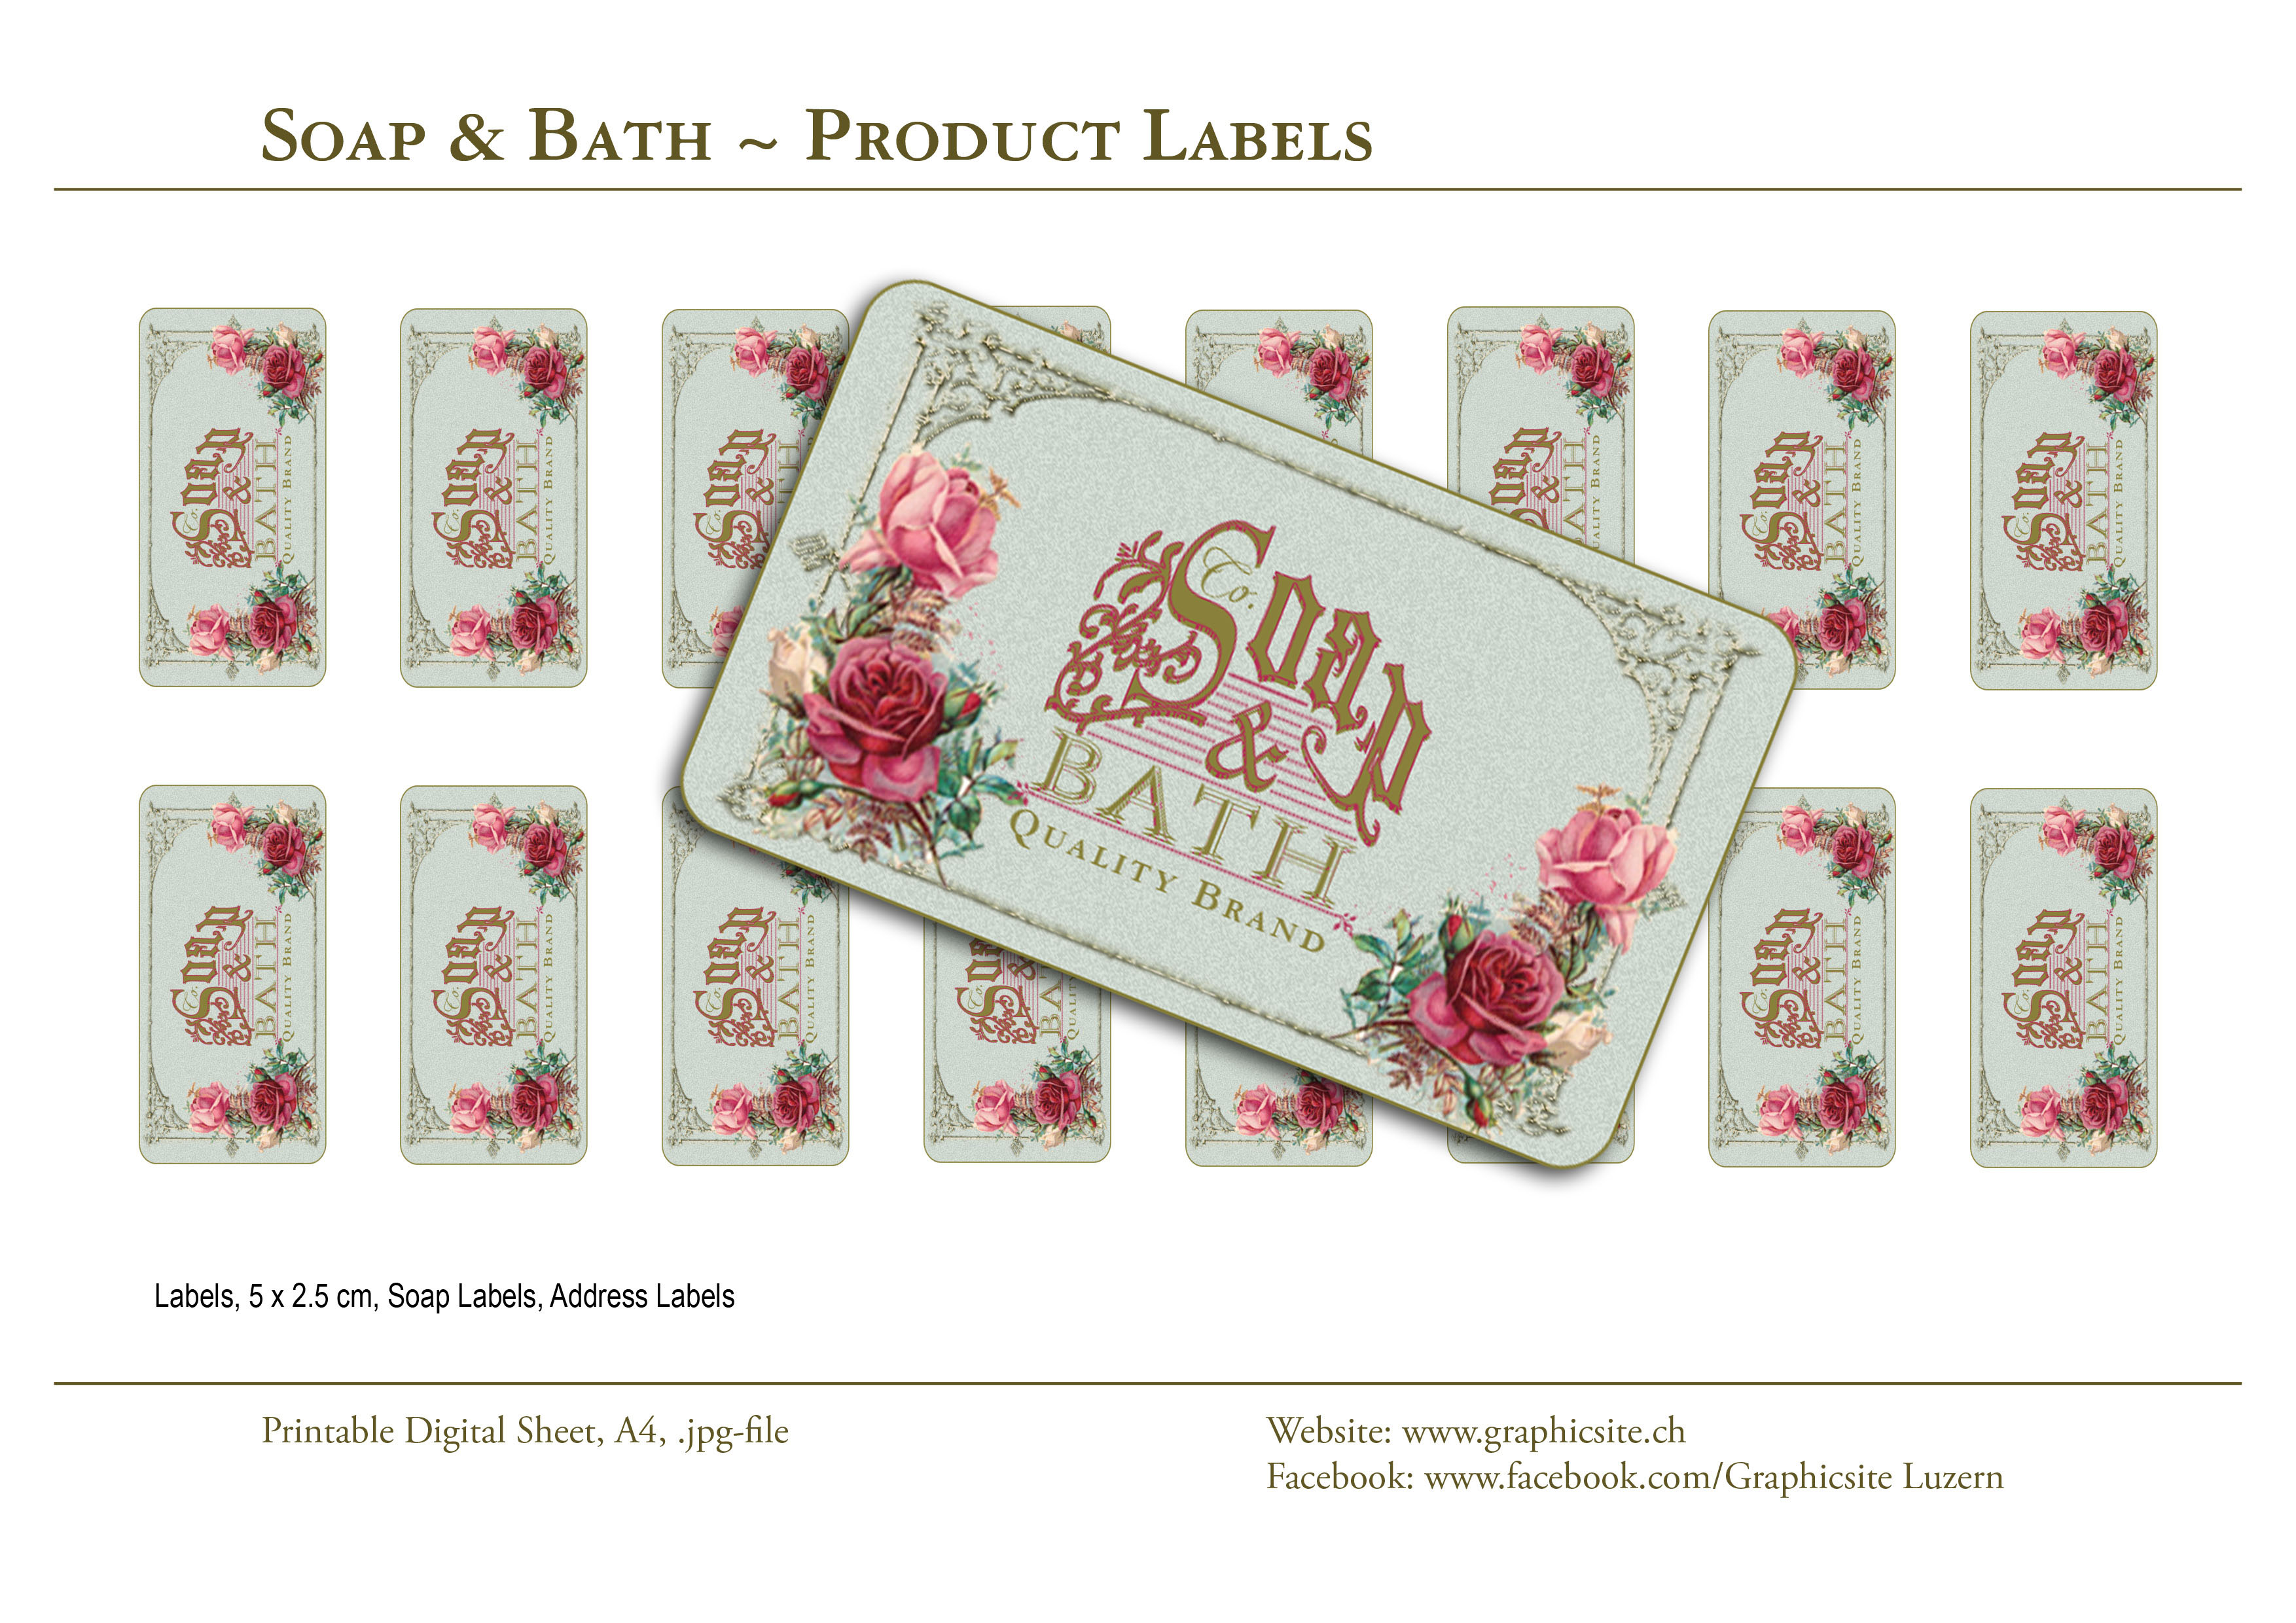 Printable Digital Sheets - Labels - Product Labels, Soap, Soapmaking, Beauty, Spa, Bath, Shower, Graphic Design, Luzern